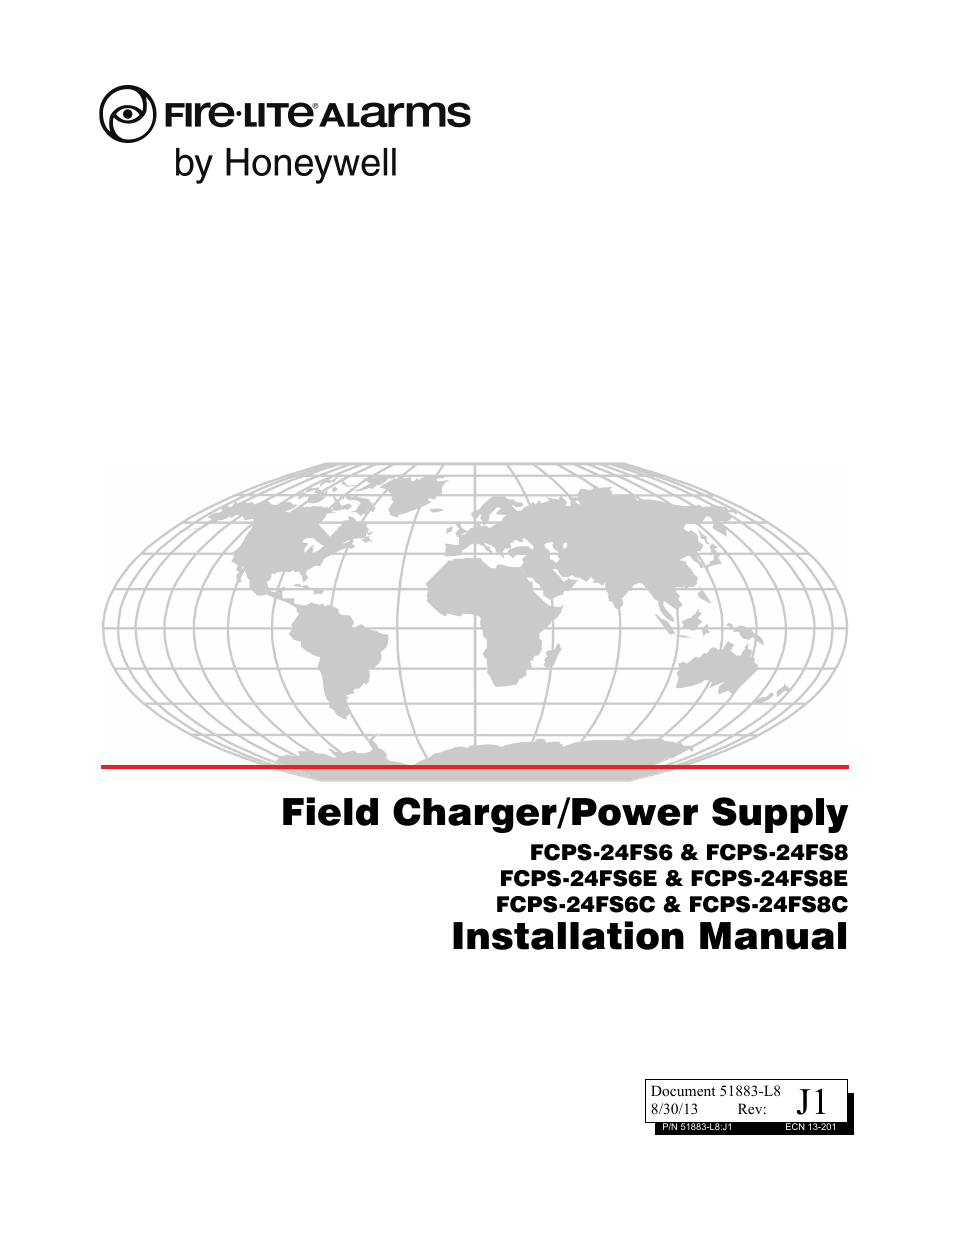 FCPS Series Field Charger/Power Supply